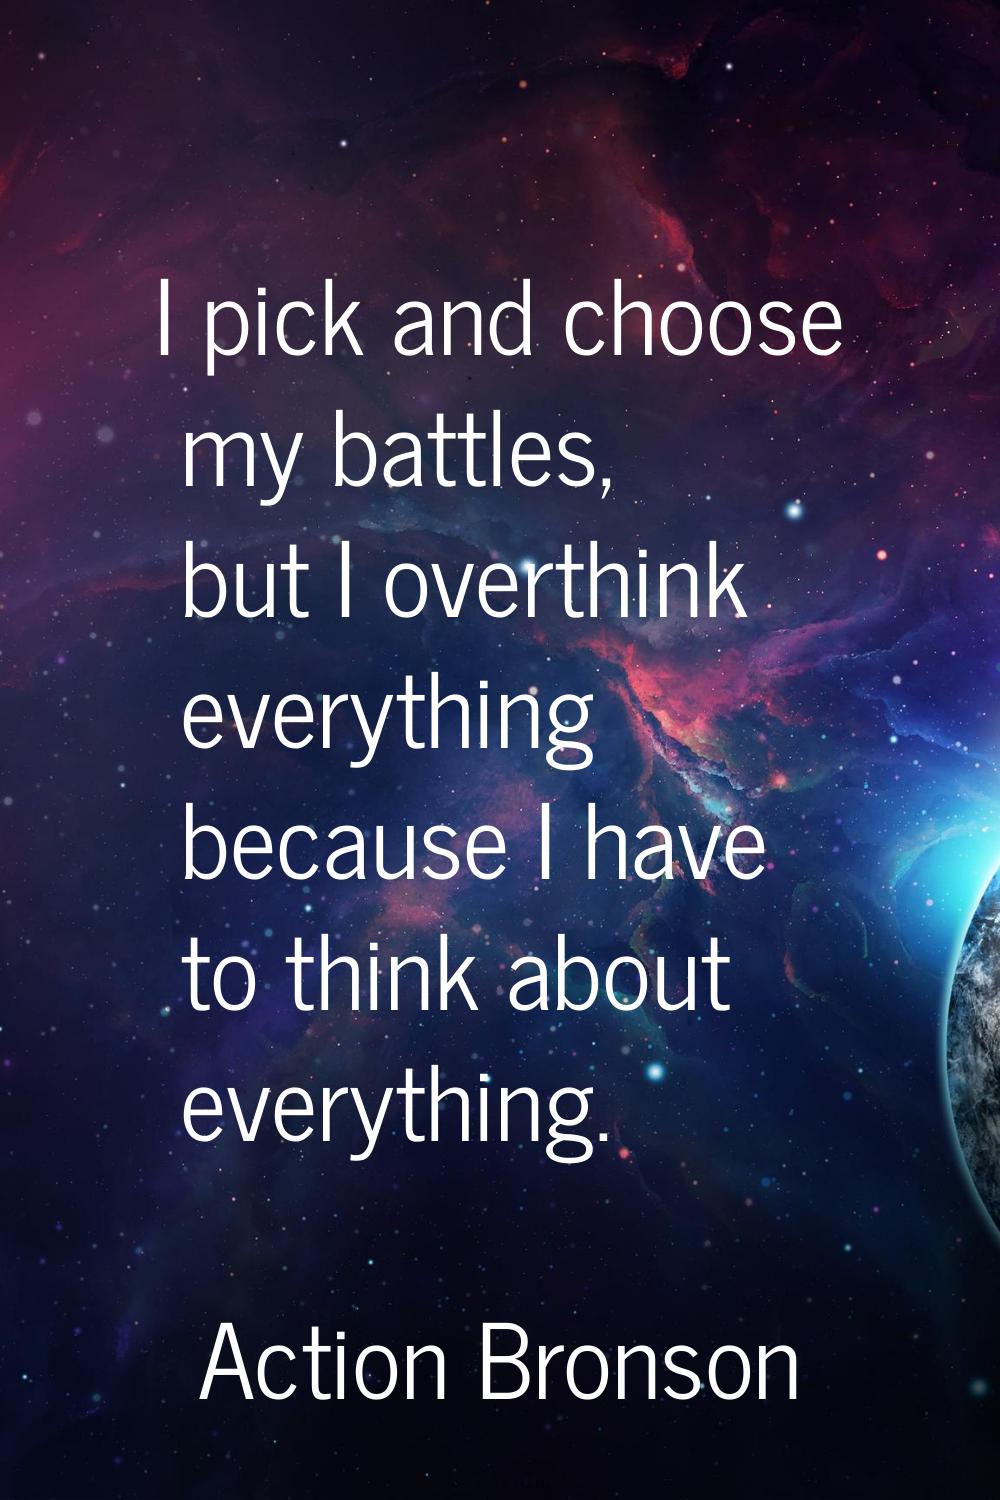 I pick and choose my battles, but I overthink everything because I have to think about everything.